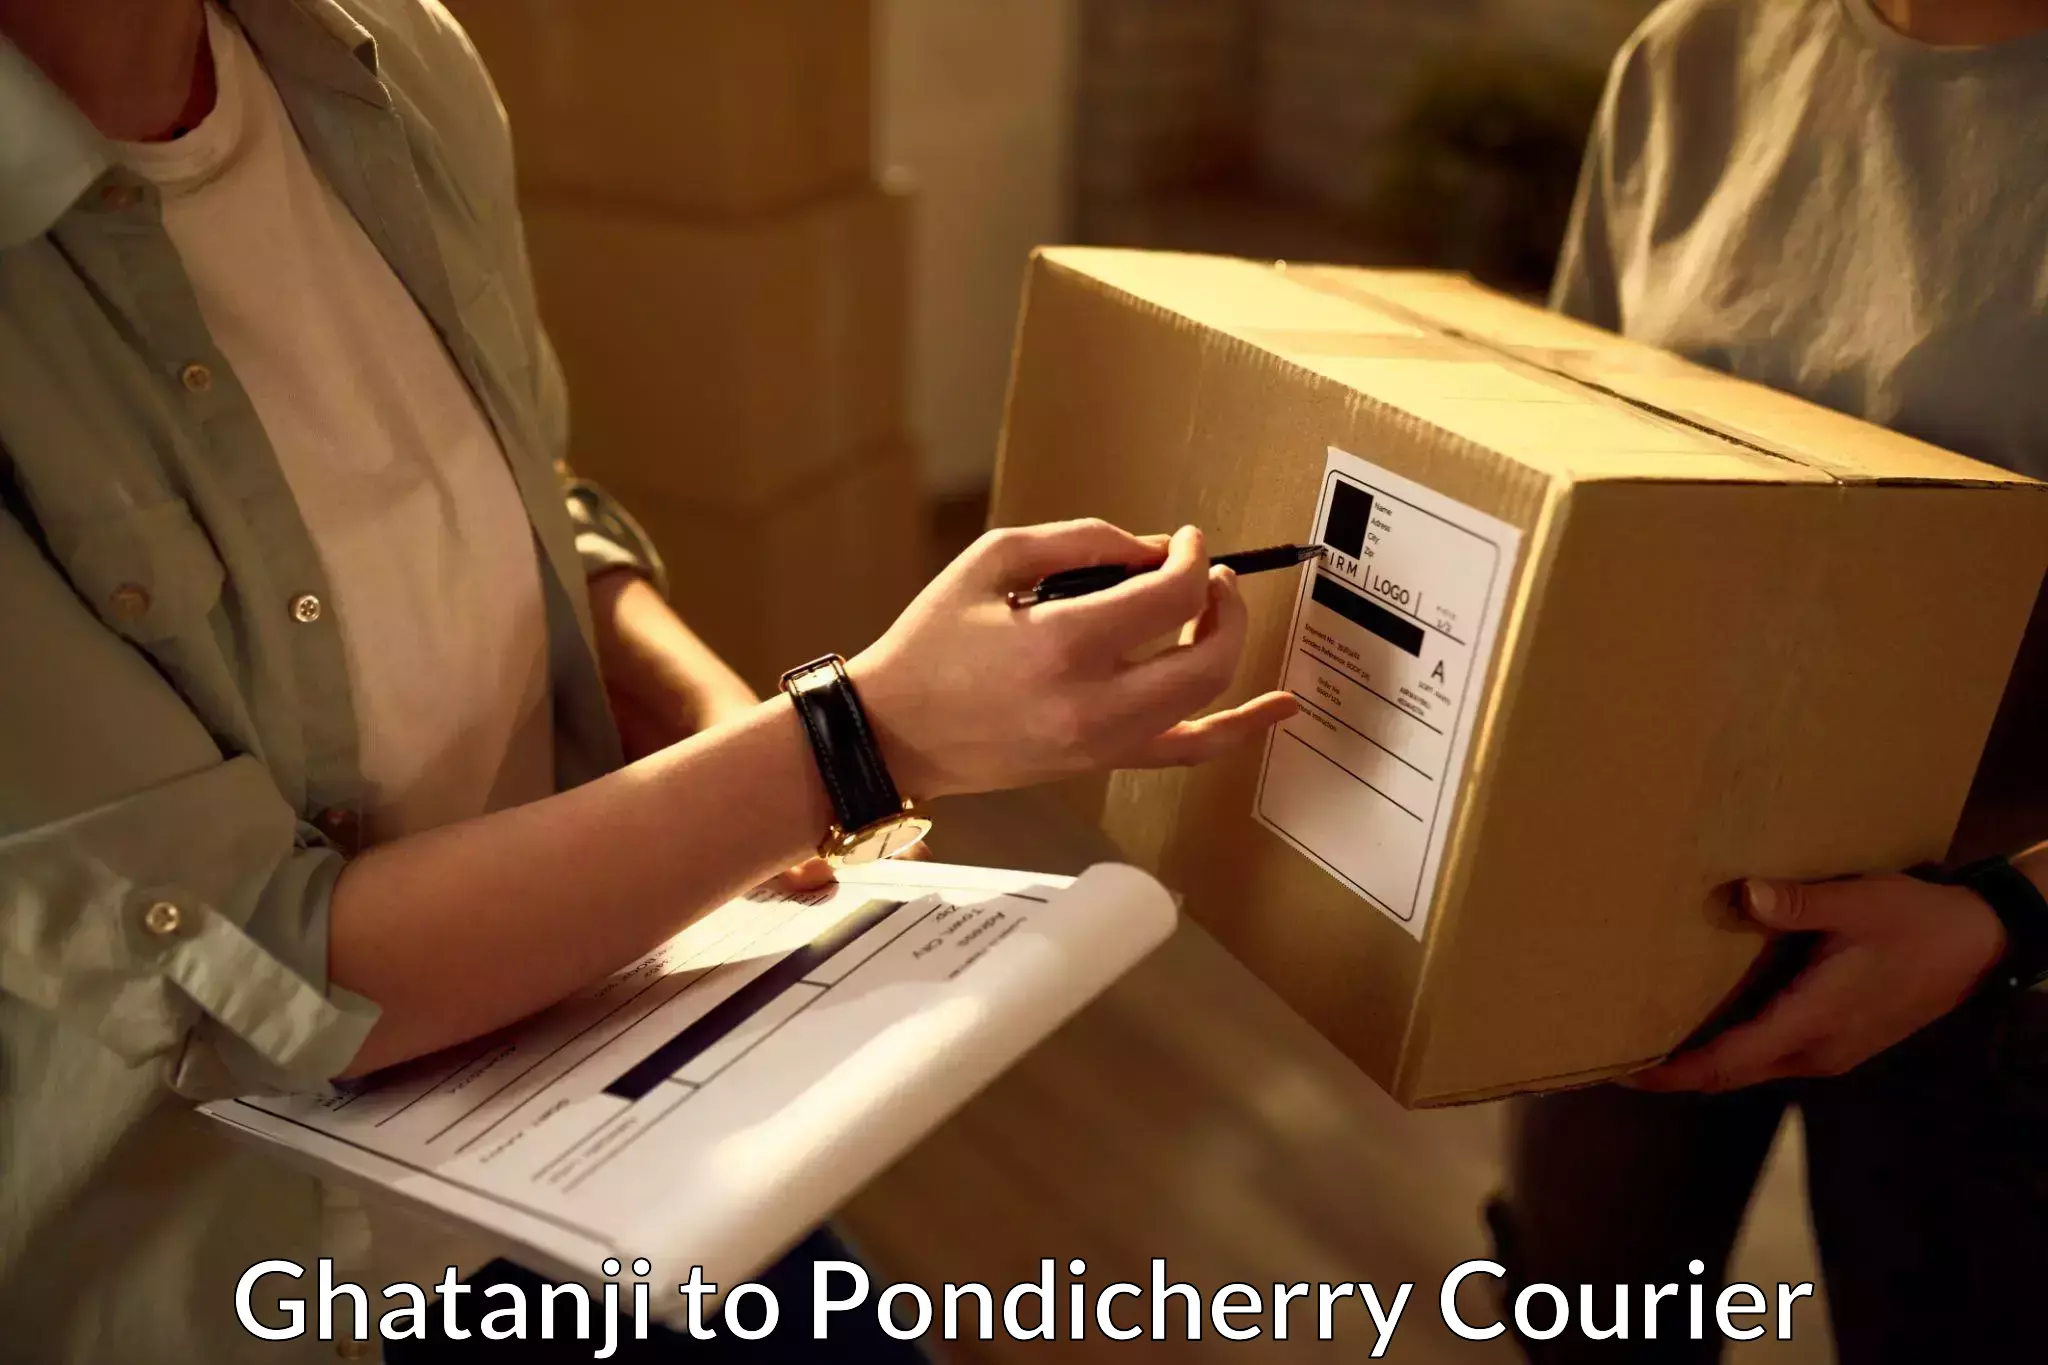 Nationwide delivery network Ghatanji to Pondicherry